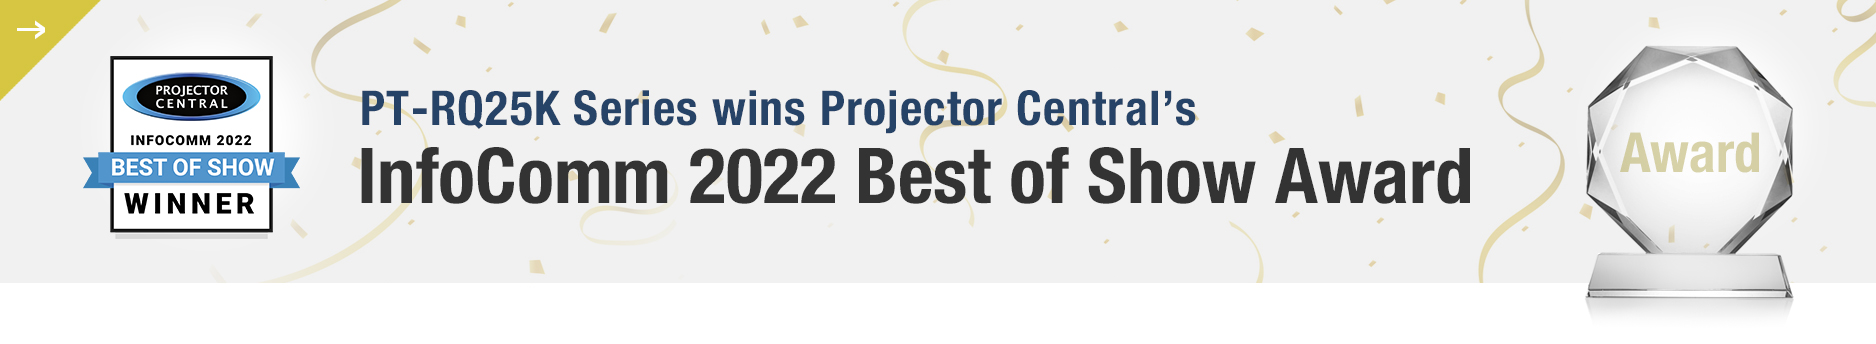 PT-RQ25K Series wins Projector Central’s InfoComm 2022 Best of Show Award